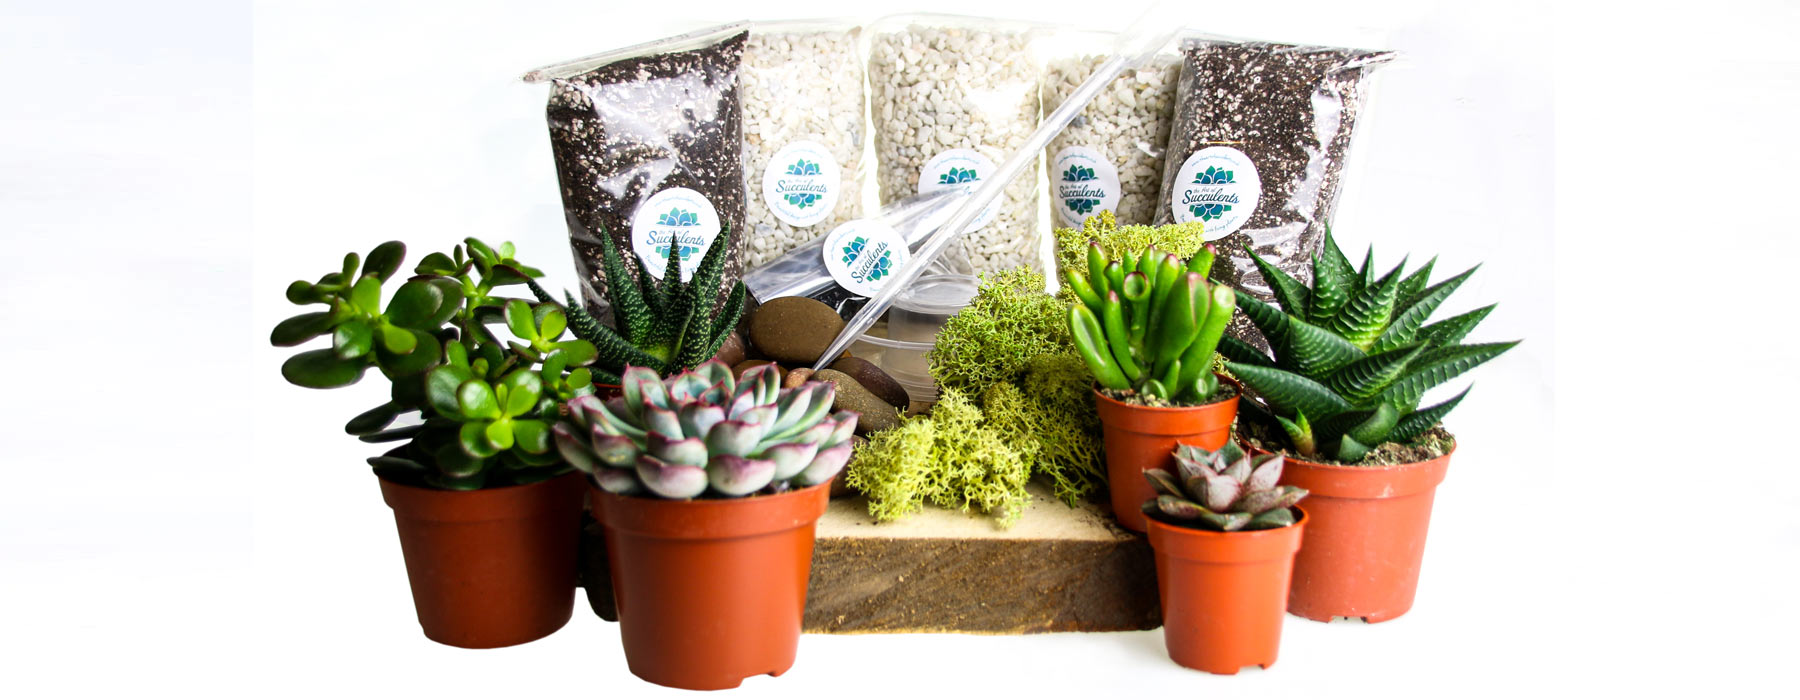 Terrarium starter kits, tools and accessories for delivery across the UK